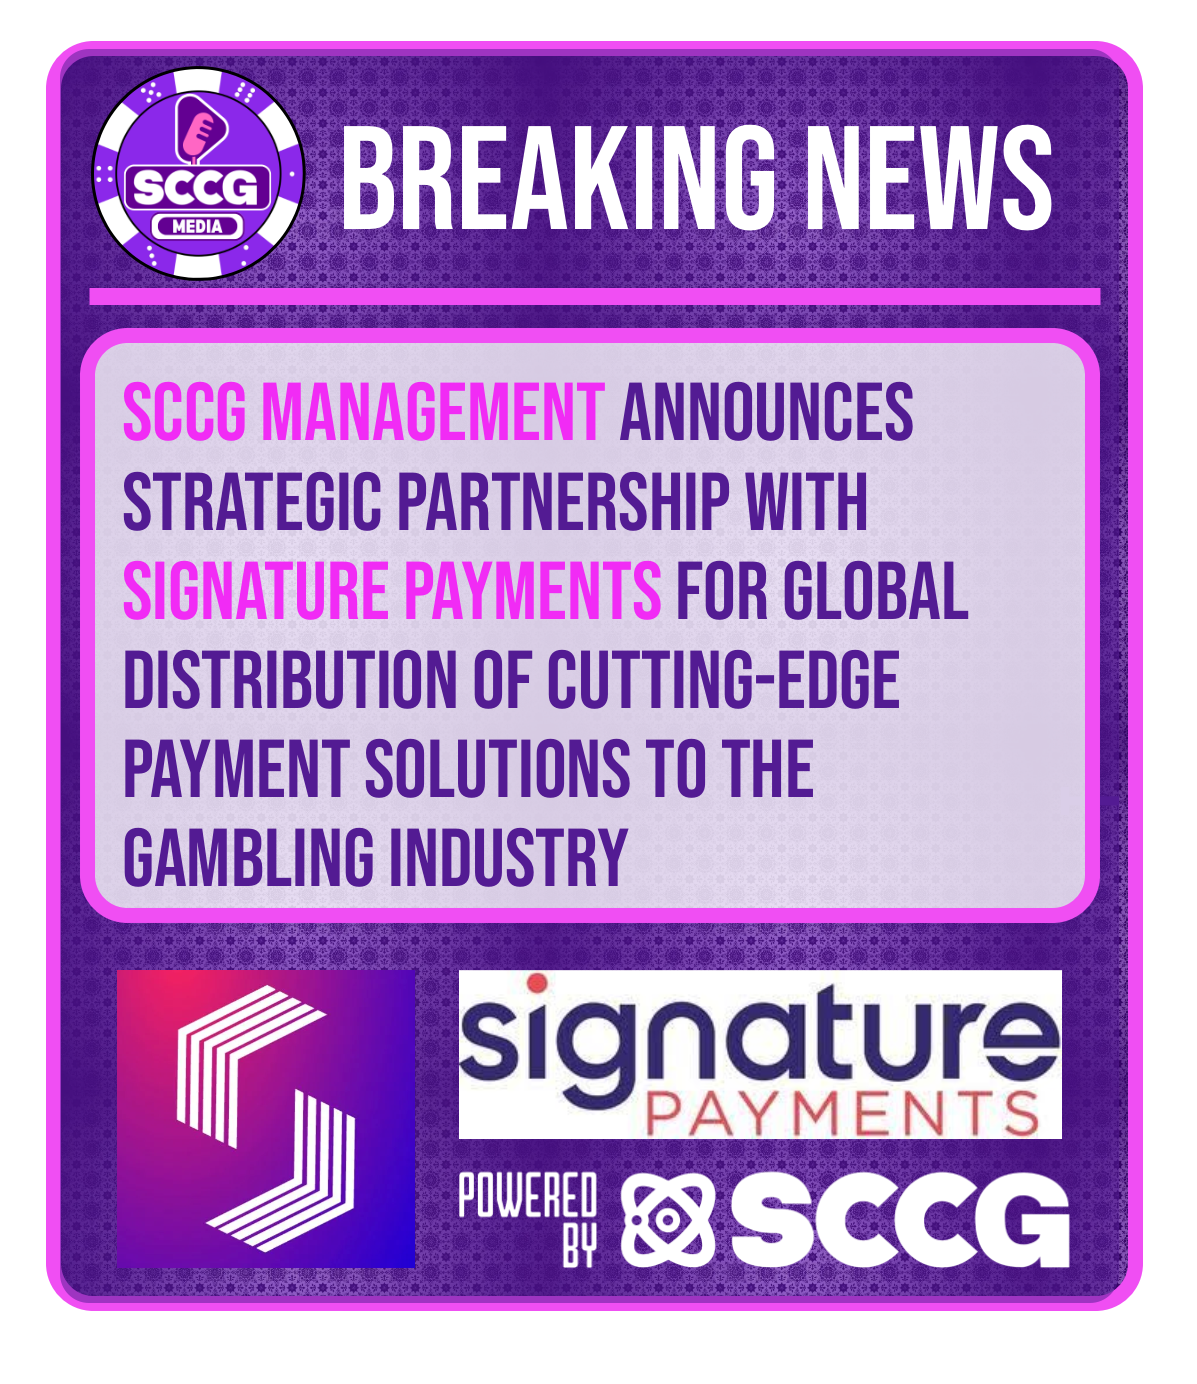 sccg-management-announces-strategic-partnership-with-signature-payments-for-global-distribution-of-cutting-edge-payment-solutions-to-the-gambling-industry